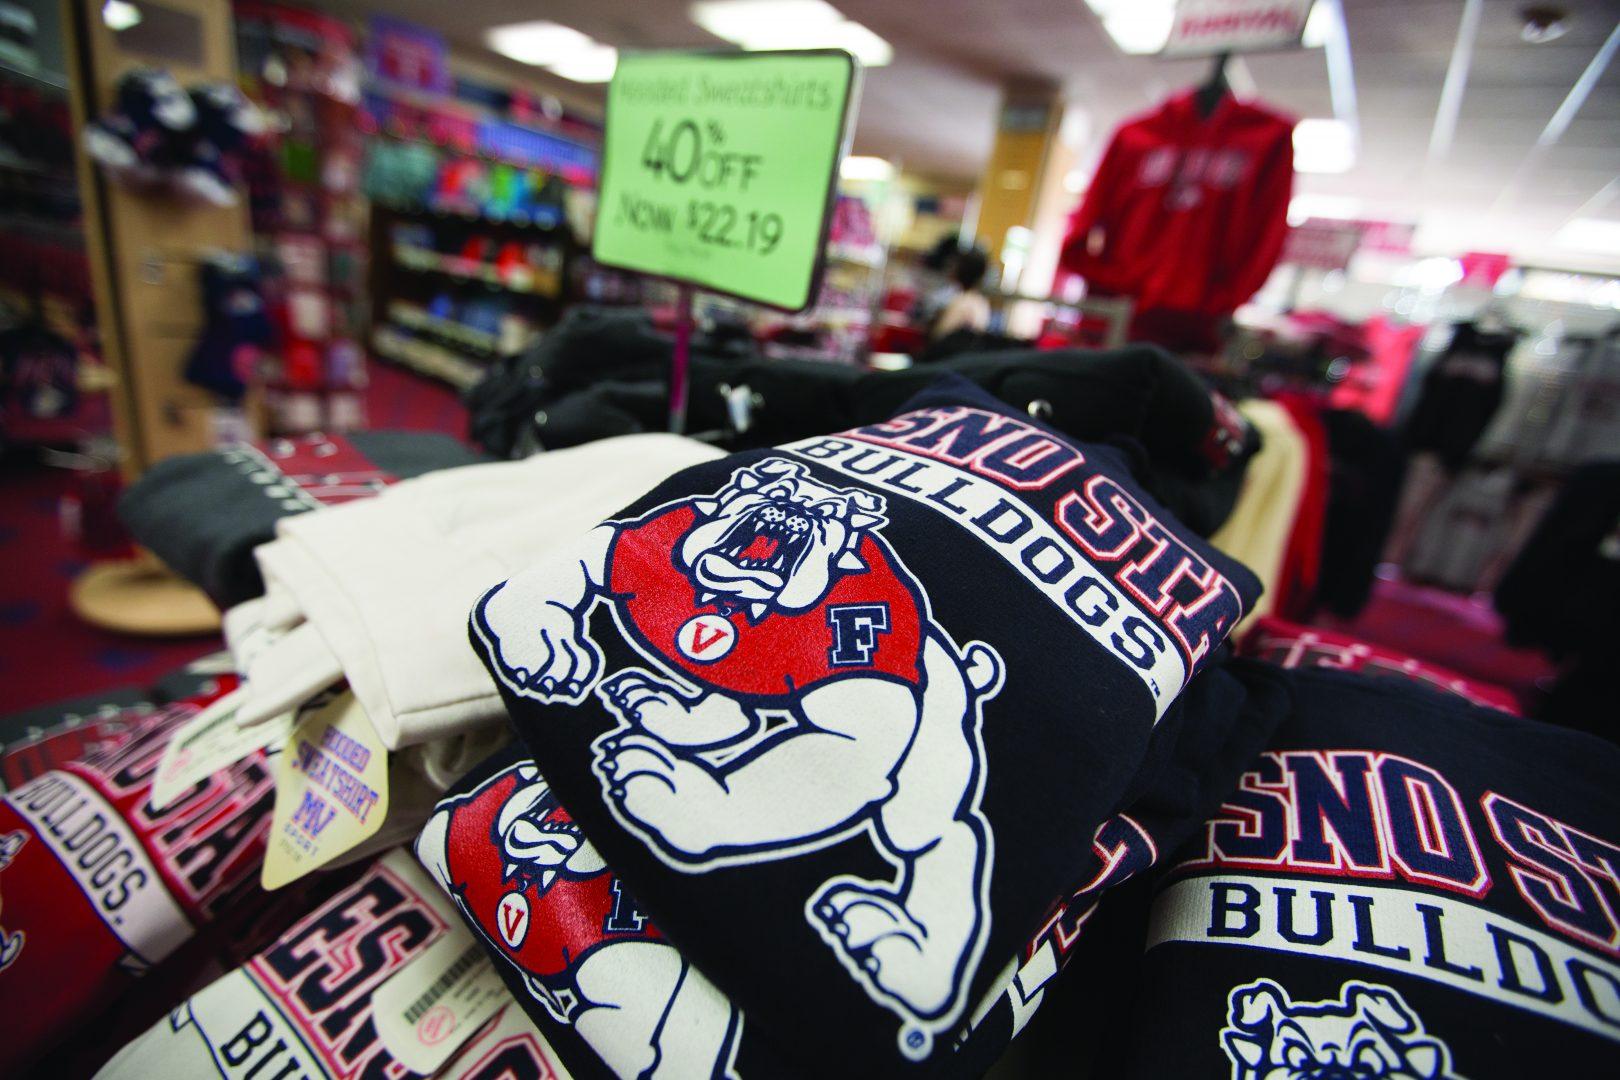 Fresno State Kennel Bookstore carries Fresno State gear such as sweatshirts, shirts, blankets and more.